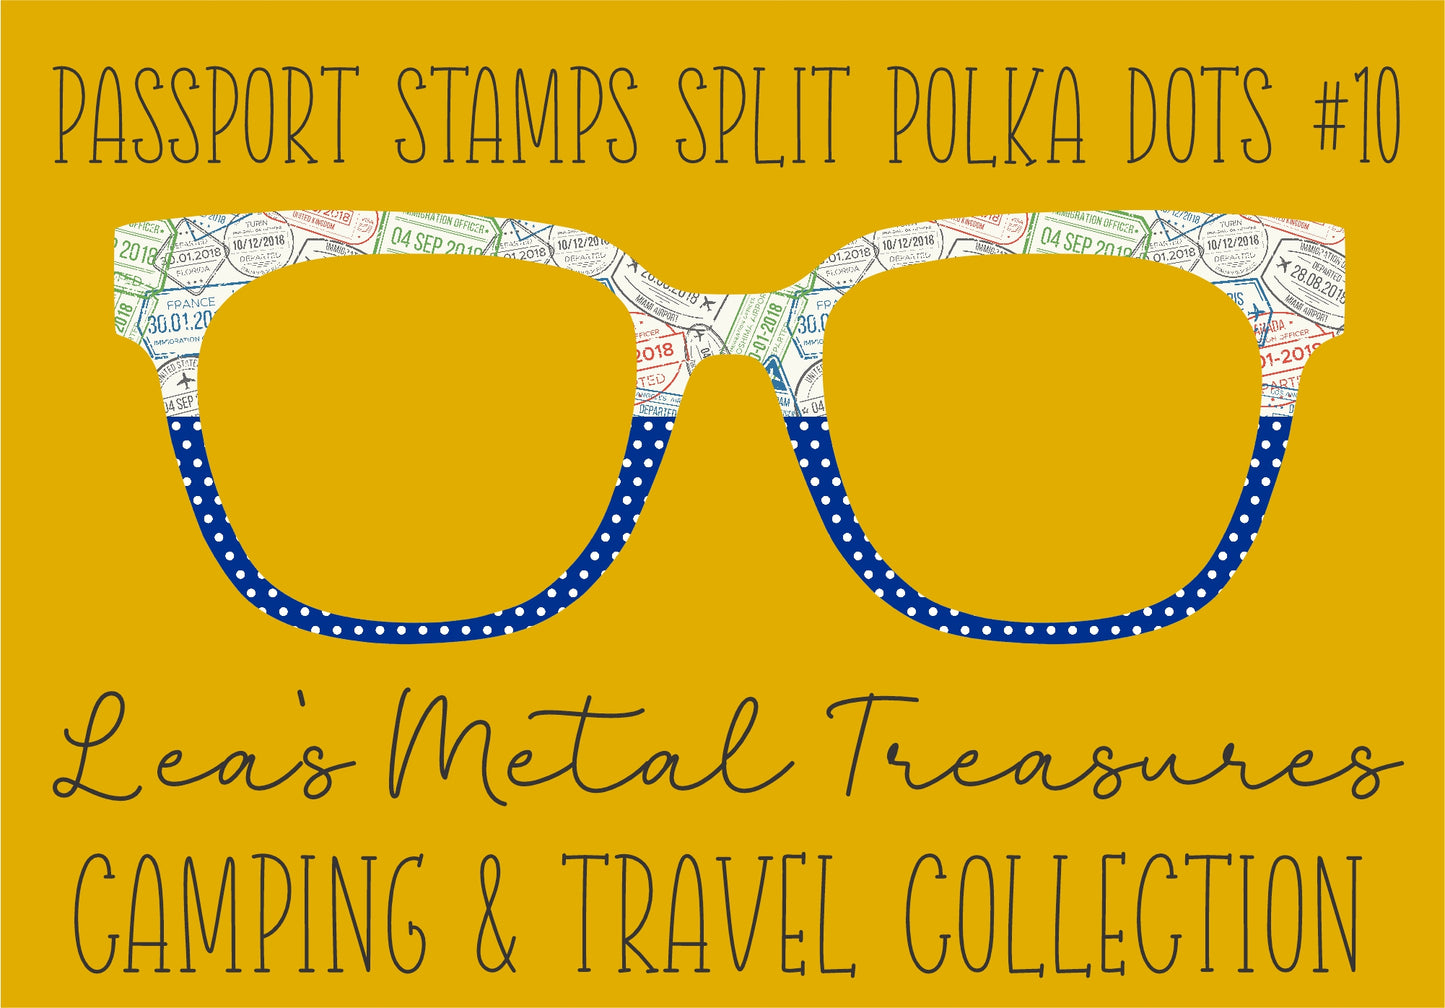 PASSPORT STAMPS SPLIT POLKADOTS #10 Eyewear Frame Toppers COMES WITH MAGNETS